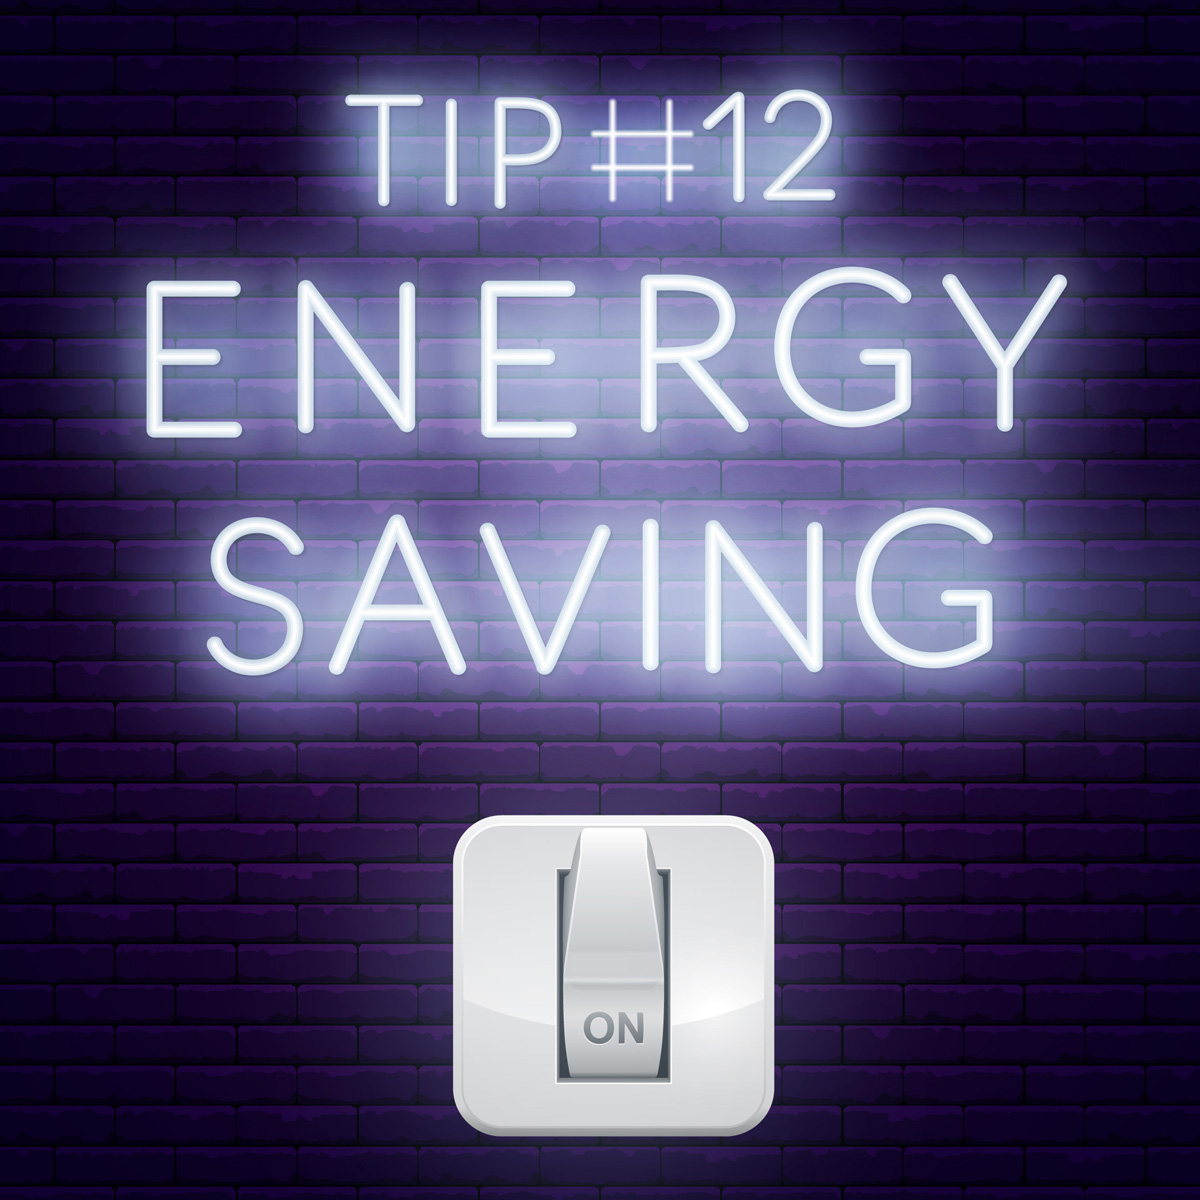 Energy savings as easy as the flip of a switch? You bet! Lighting accounts for about 12% of residential utility costs, so turning off the lights when you leave the room is an easy way to save.
.
.
#hometips #savesomemoney #energybill #socalrealestate #californiarealestate #1stur